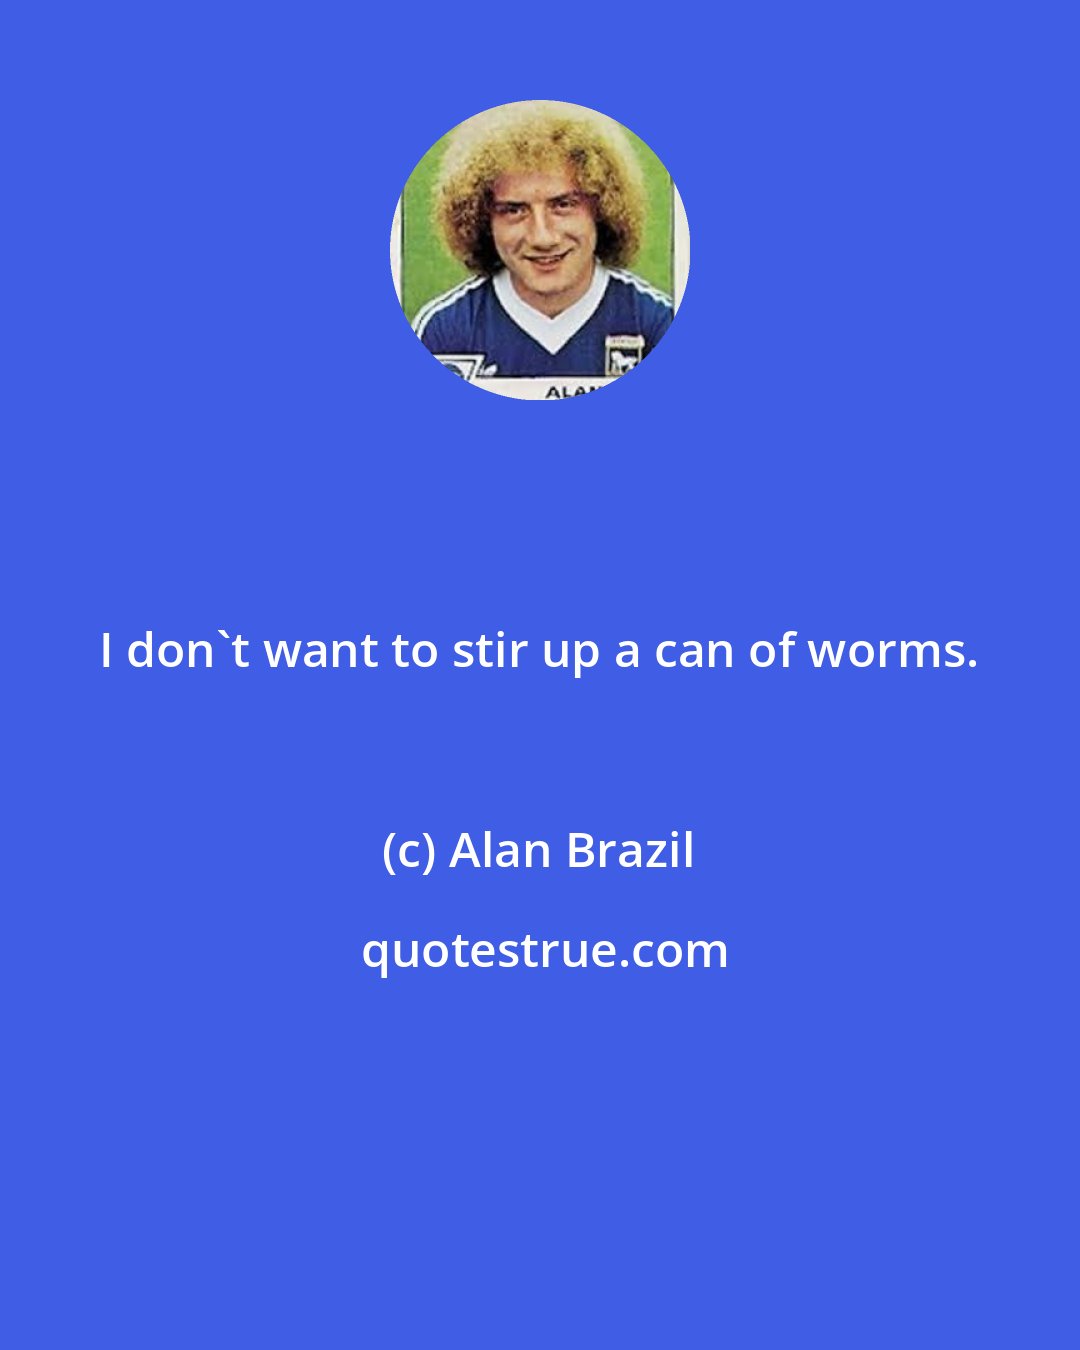 Alan Brazil: I don't want to stir up a can of worms.